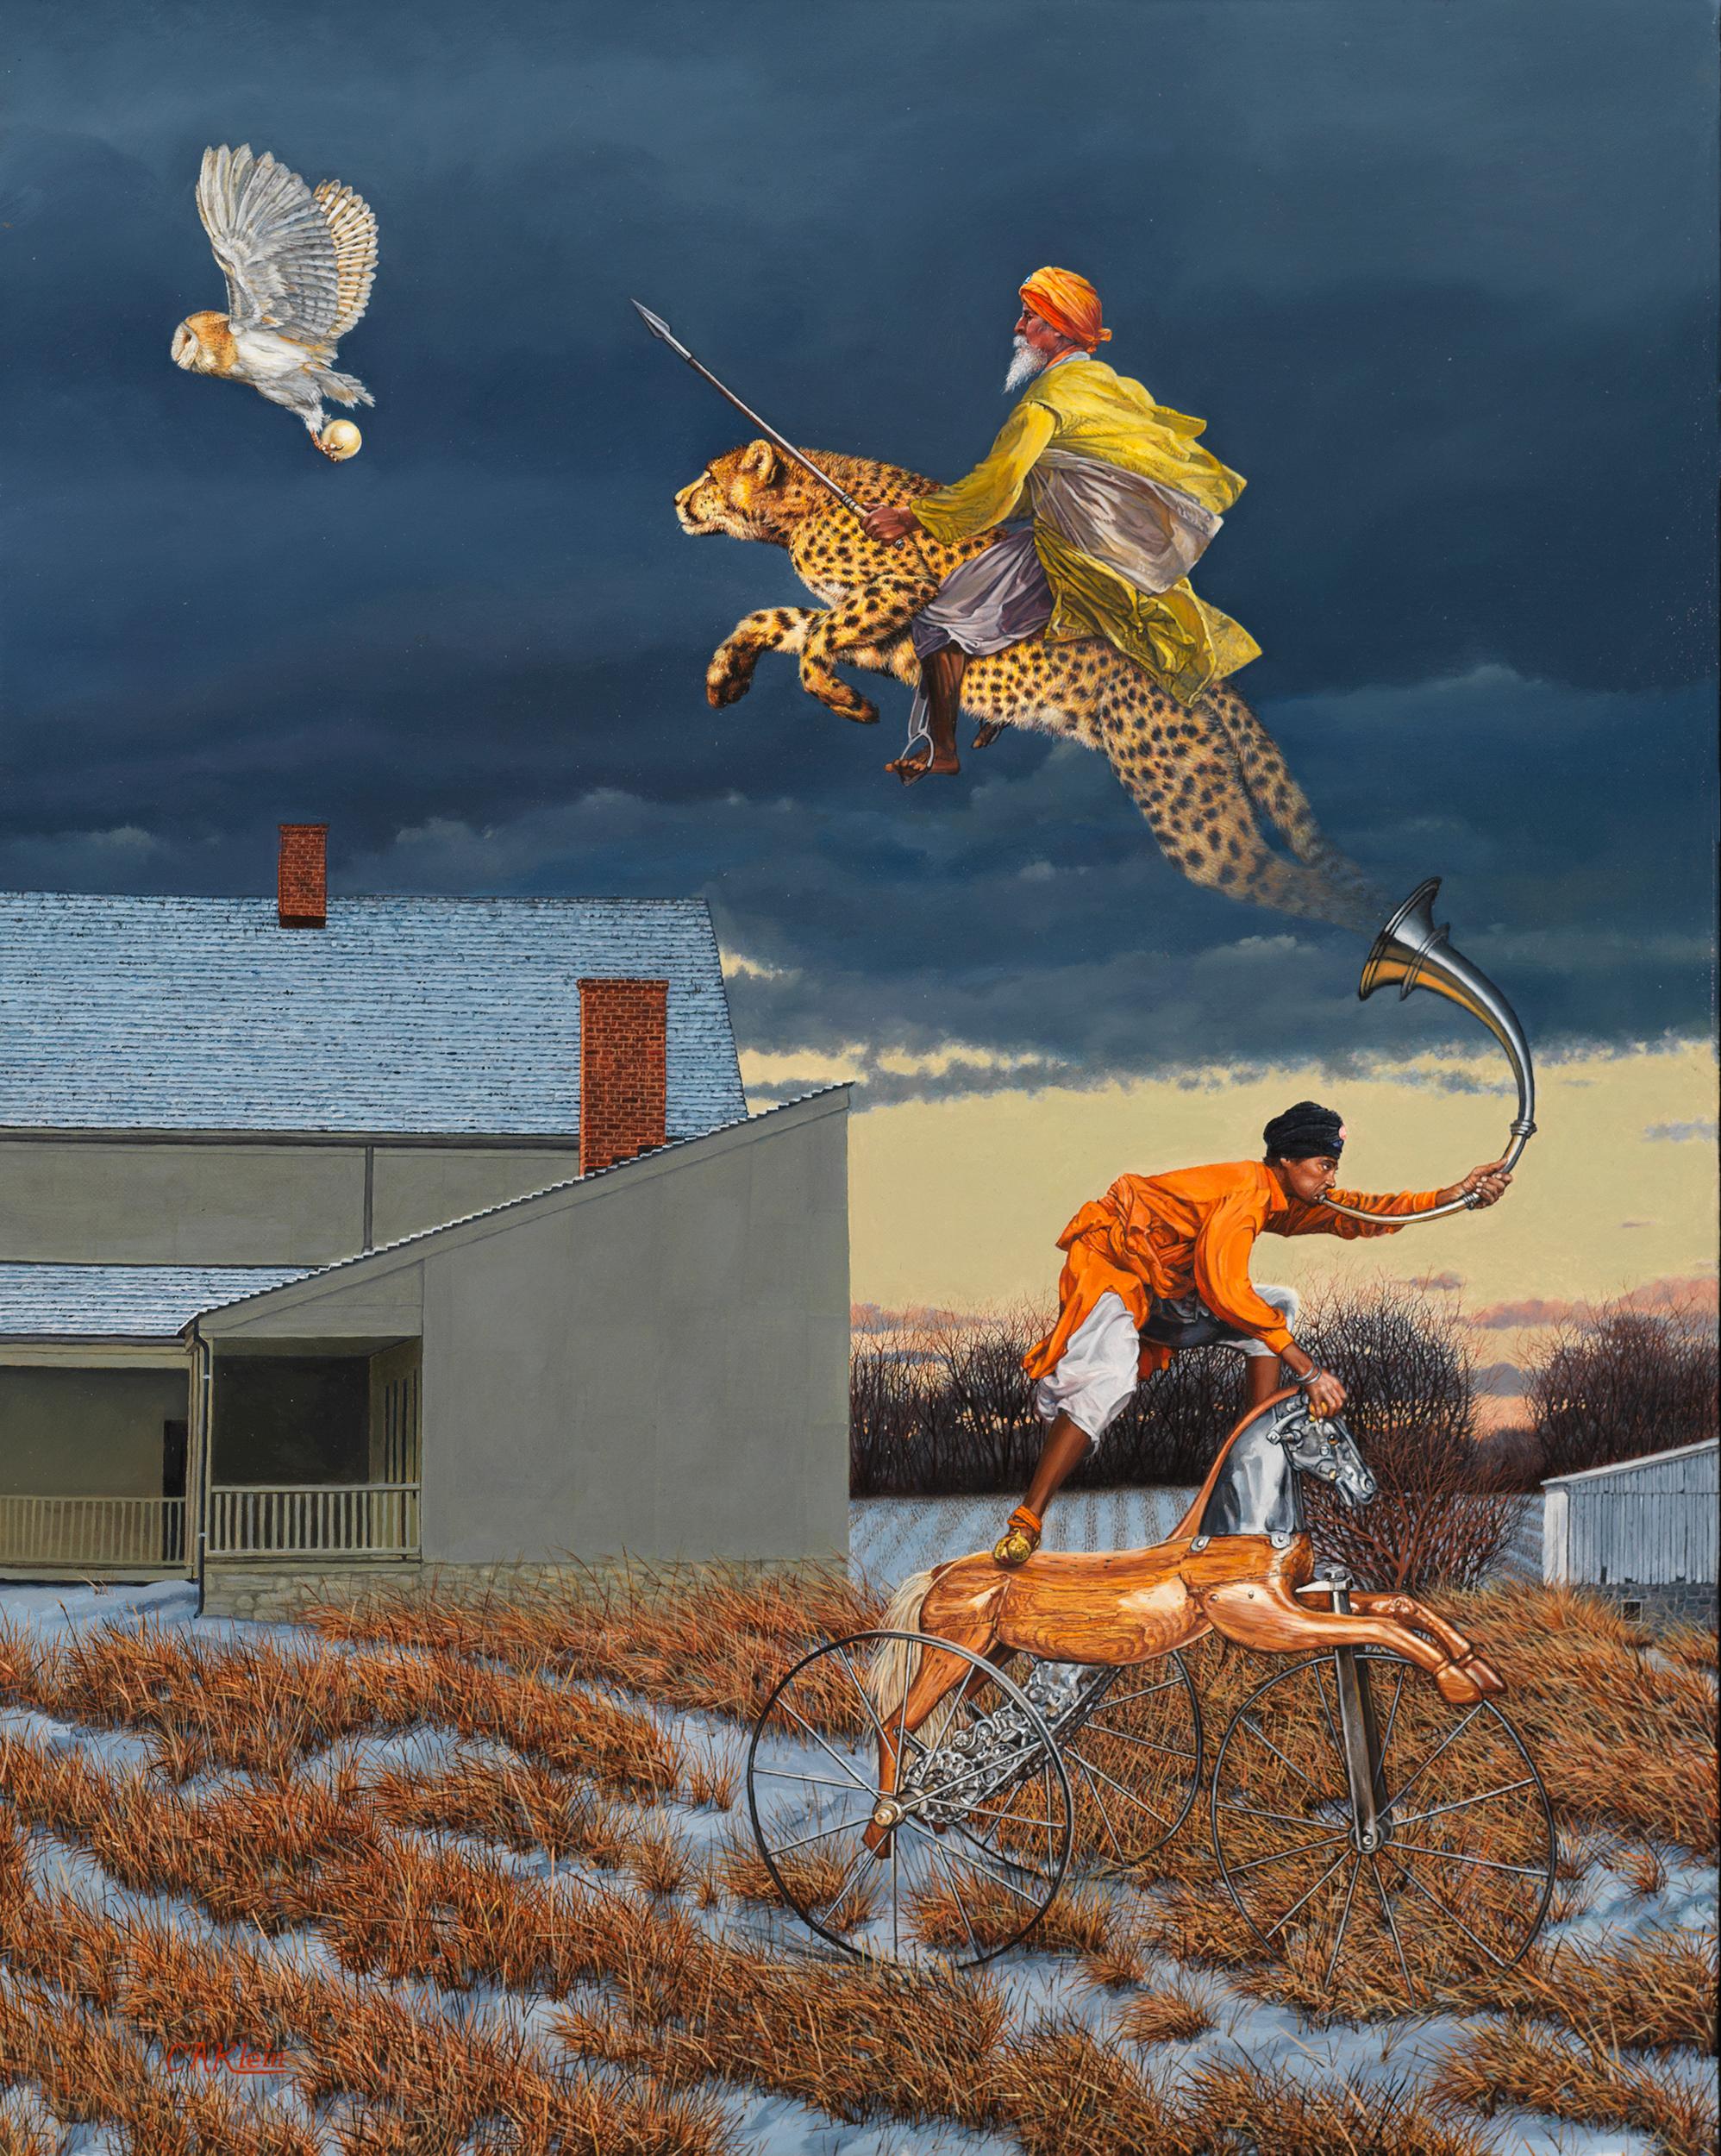 Wisdom Trumps Violence - Surreal Oil Painting with a Leopard, an Owl, and a Man